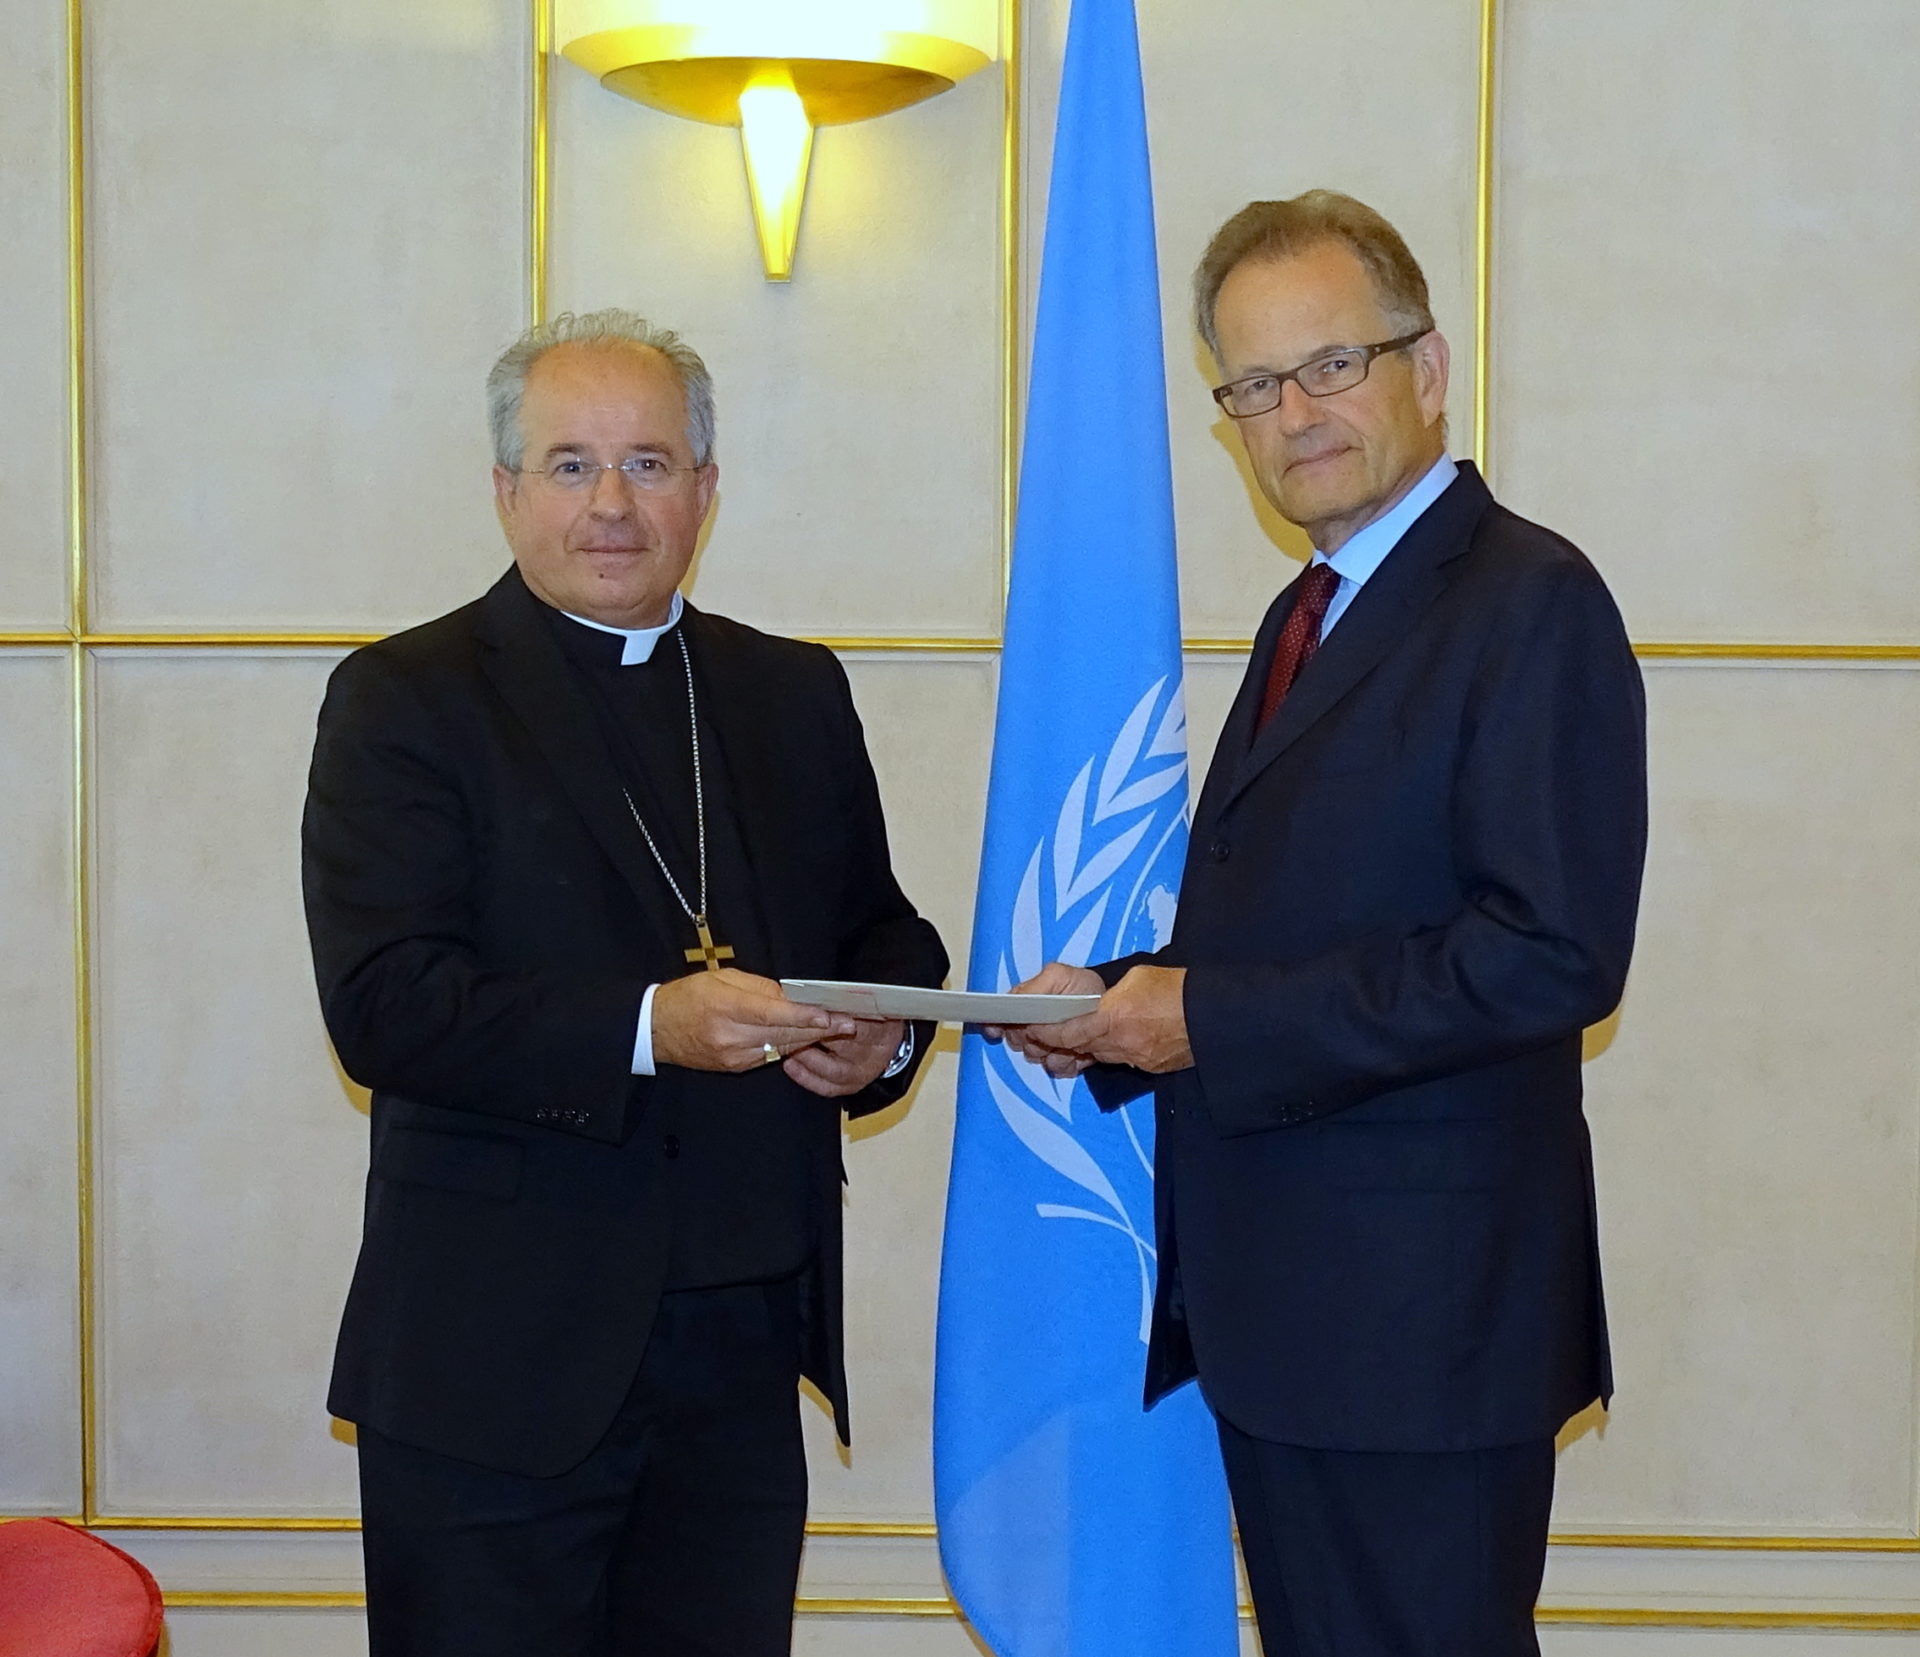 H.E.Archbishop Ivan Jurkovic, Apostolic Nuncio and Permanent Observer of the Holy See to the United Nations in Geneva.